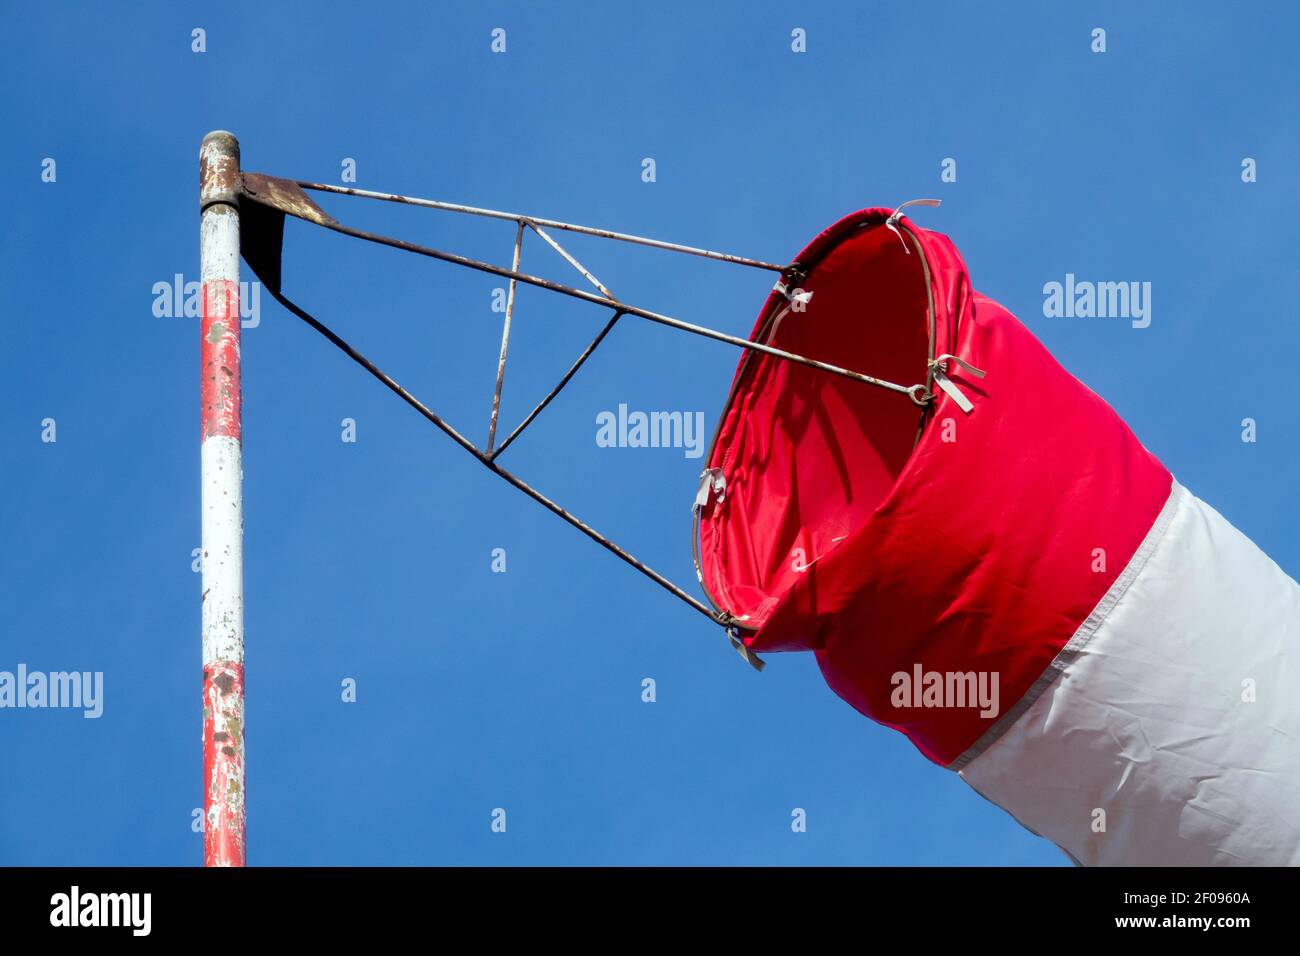 Close up wind sock, air sleeve on striped pole against blue sky Stock Photo